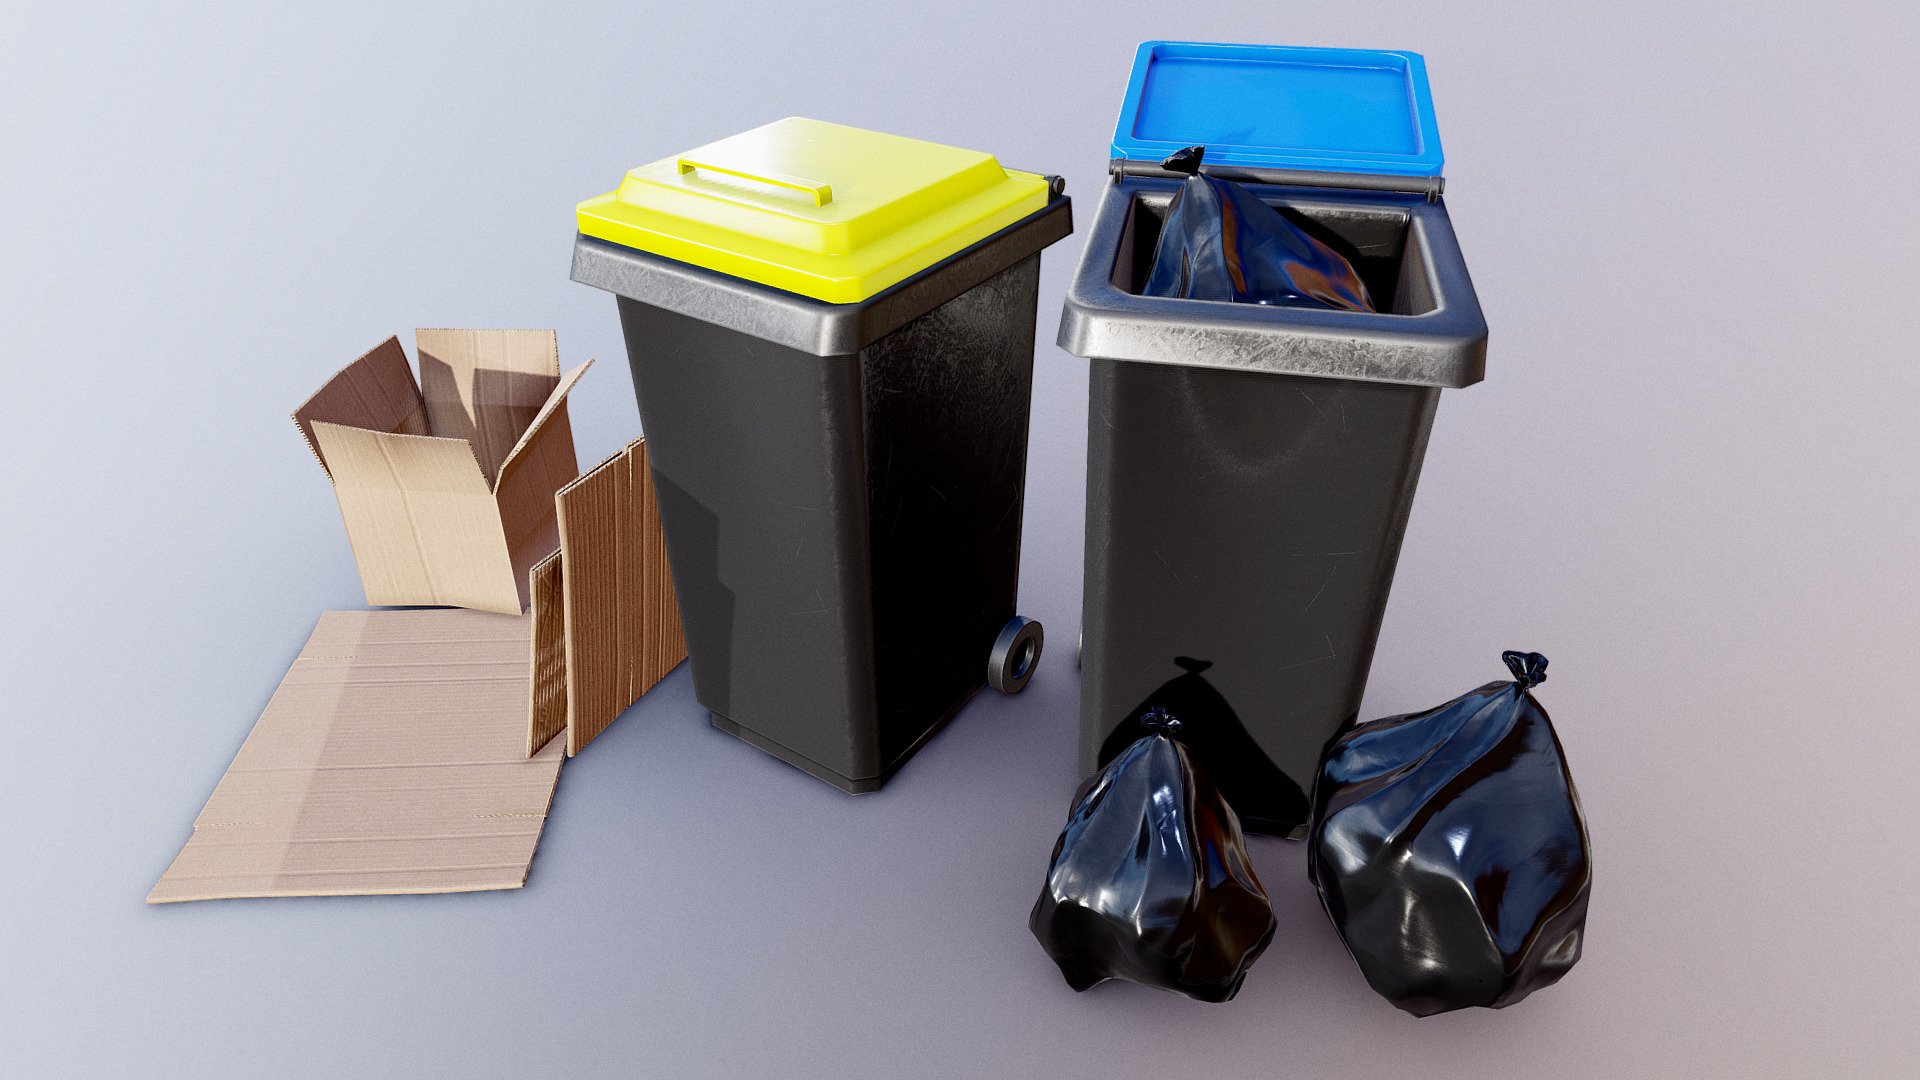 In France, almost every house has at least two trashcans: the blue one is for common garbage and the yellow one is for recycling garbage like plastic, cardboard and paper.

This asset is lowpoly and gameready for Unity and Unreal engine (URP-Standard / HDRP). It contains 2k png textures for cardboard and 4k for trashcan.

3D Models :


Cardboard Box 1 : 288 triangles
Cardboard Box 2 : 244 triangles
Trashcan : 676 triangles
Trashcan Top : 328 triangles
Trashcan Wheel : 1012 triangles
Trashcan Full : 2016 triangles
Trashbag : 1344 triangles

Inspired by my trashcan and made for #TrashChallenge with the goal to be used in videogames.

If you have any question, don’t hesitate to send me a mail at monkystudiogame@gmail.com.

PS : It is trashcan or trashbin ? I don't kow. If an english person can tell me the difference. Thanks :) - Trashcan + Cardboard box - GameReady Unity/Ue4 - Buy Royalty Free 3D model by Monky (@MonkyStudio) 3d model